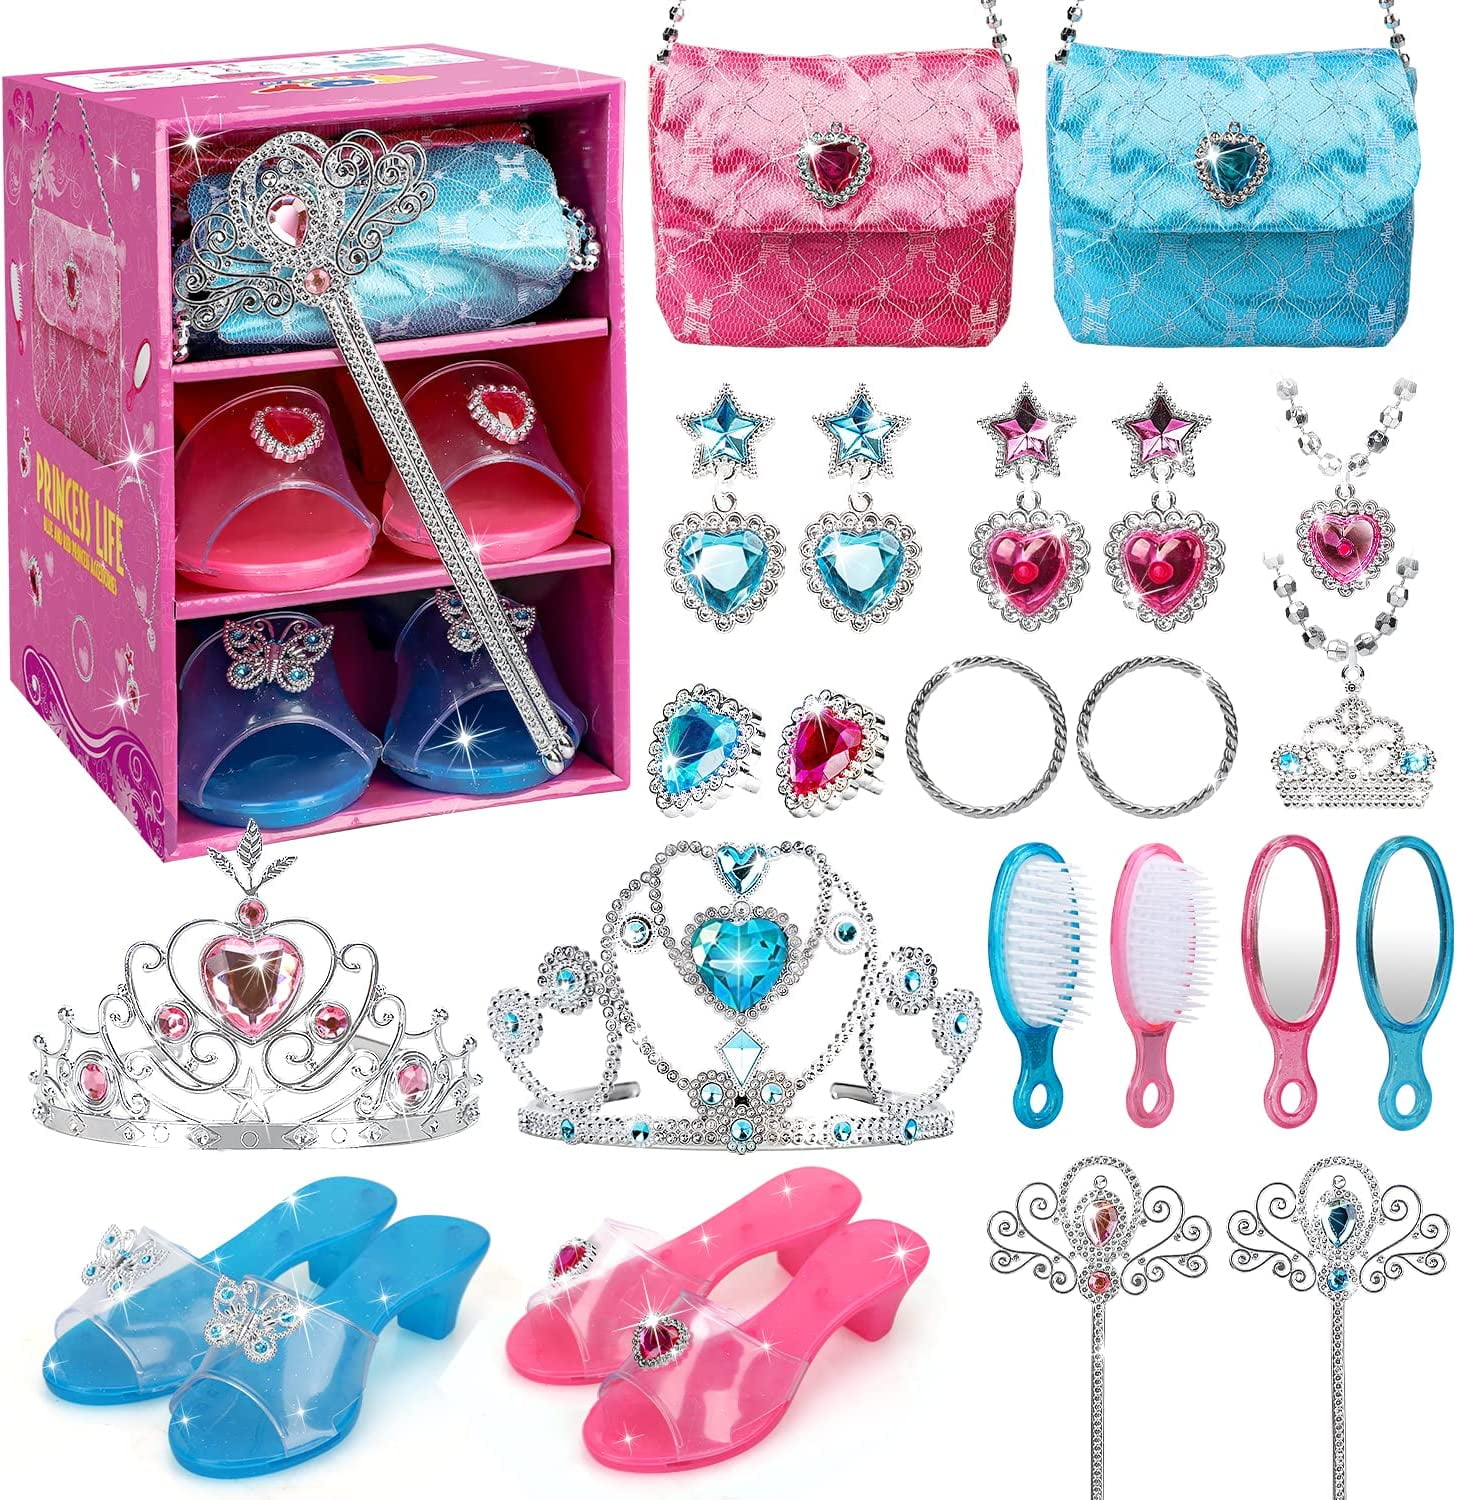 TOY Life Princess Toys for Girls with Princess Crown Play Jewelry for ...